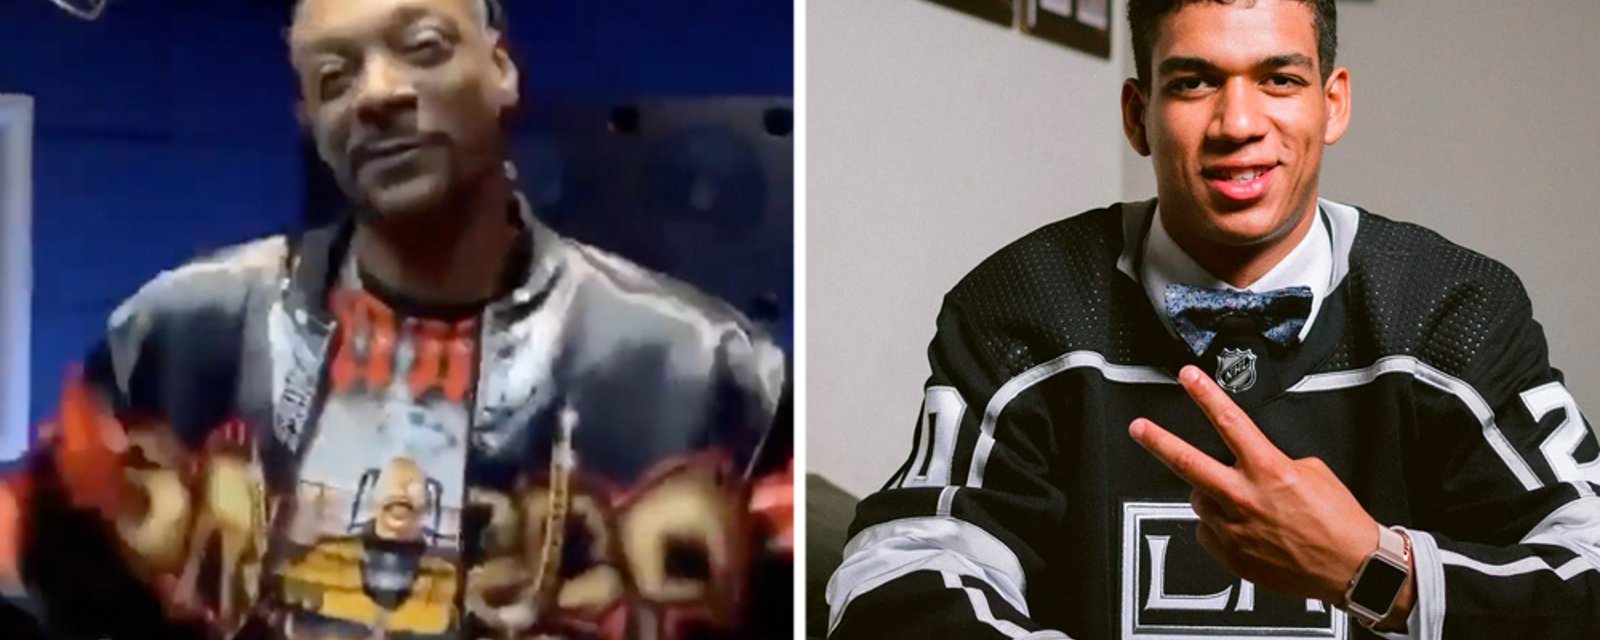 Snoop Dogg welcomes Kings rookie Quinton Byfield to the NHL